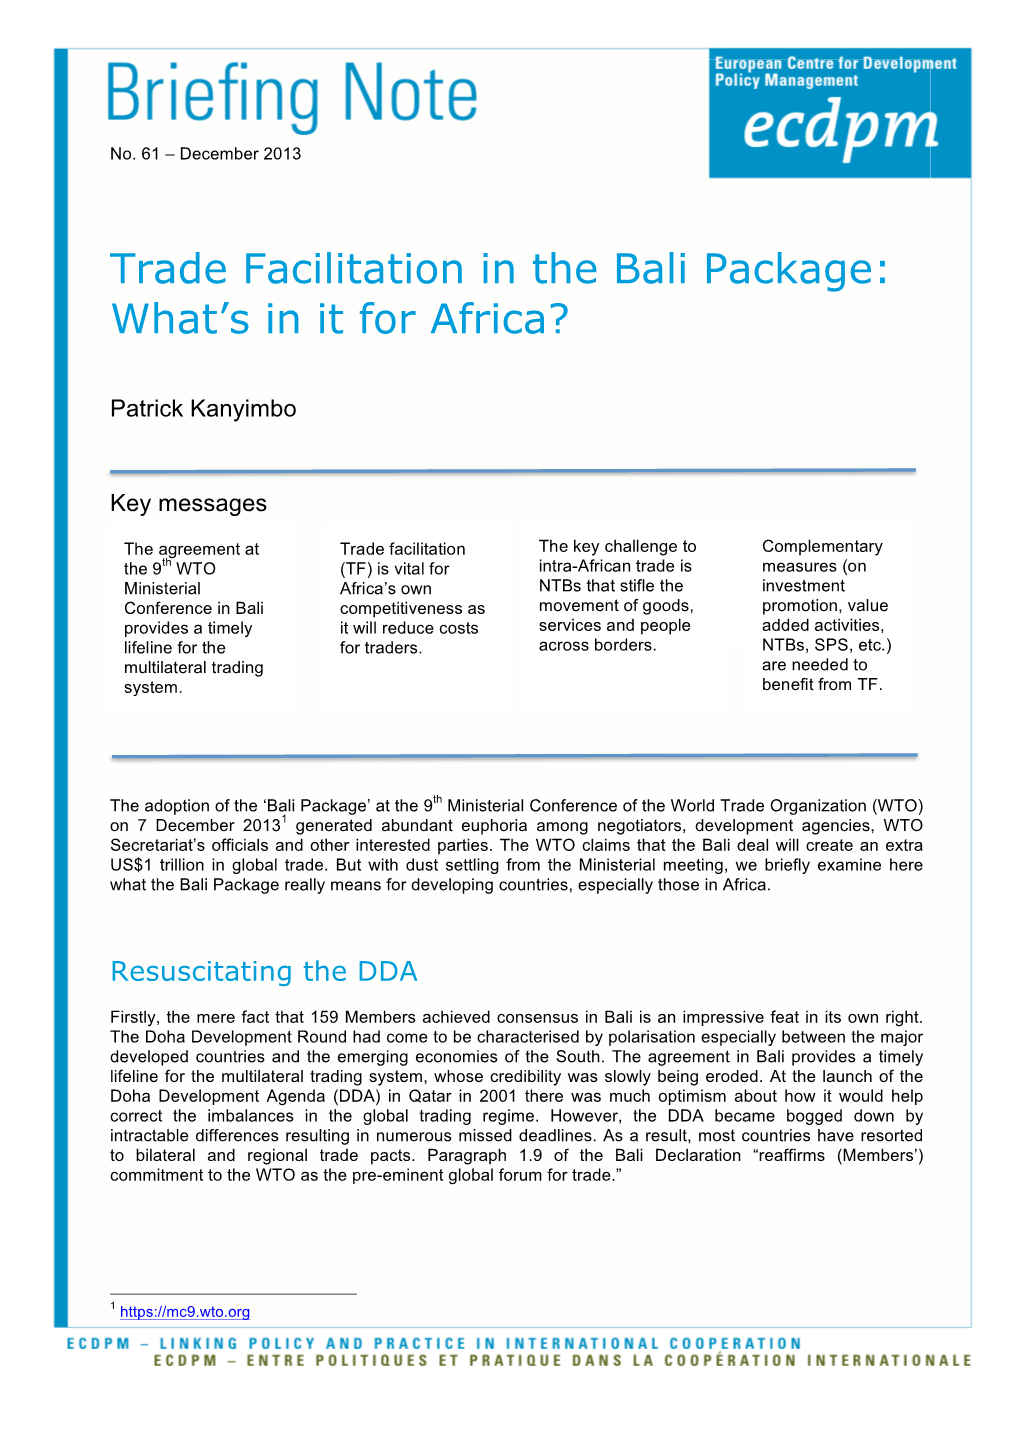 Trade Facilitation in the Bali Package: What’S in It for Africa?